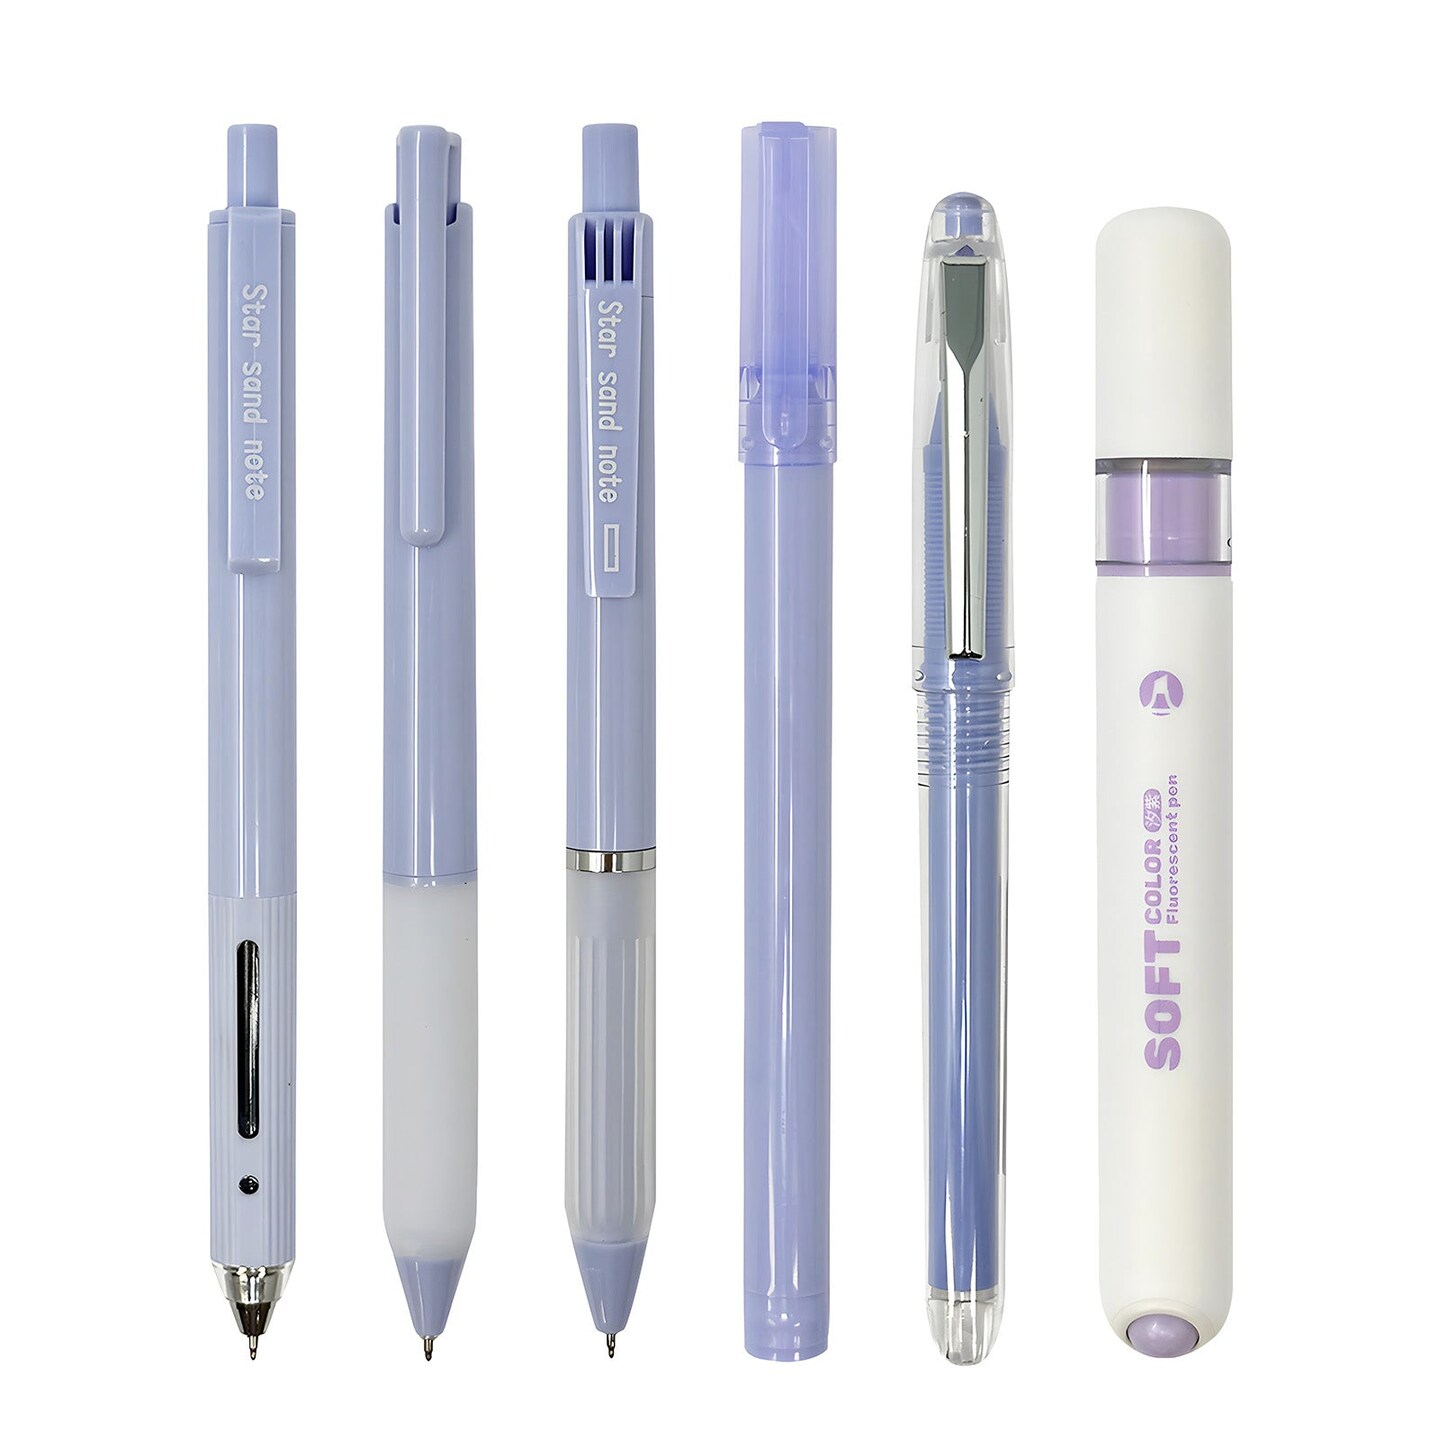 Wrapables 5 Gel Pens + 1 Highlighter Writing Set, 0.5mm Black Ink Pens, for Bible Studies, Journaling, Home and Office, Purple